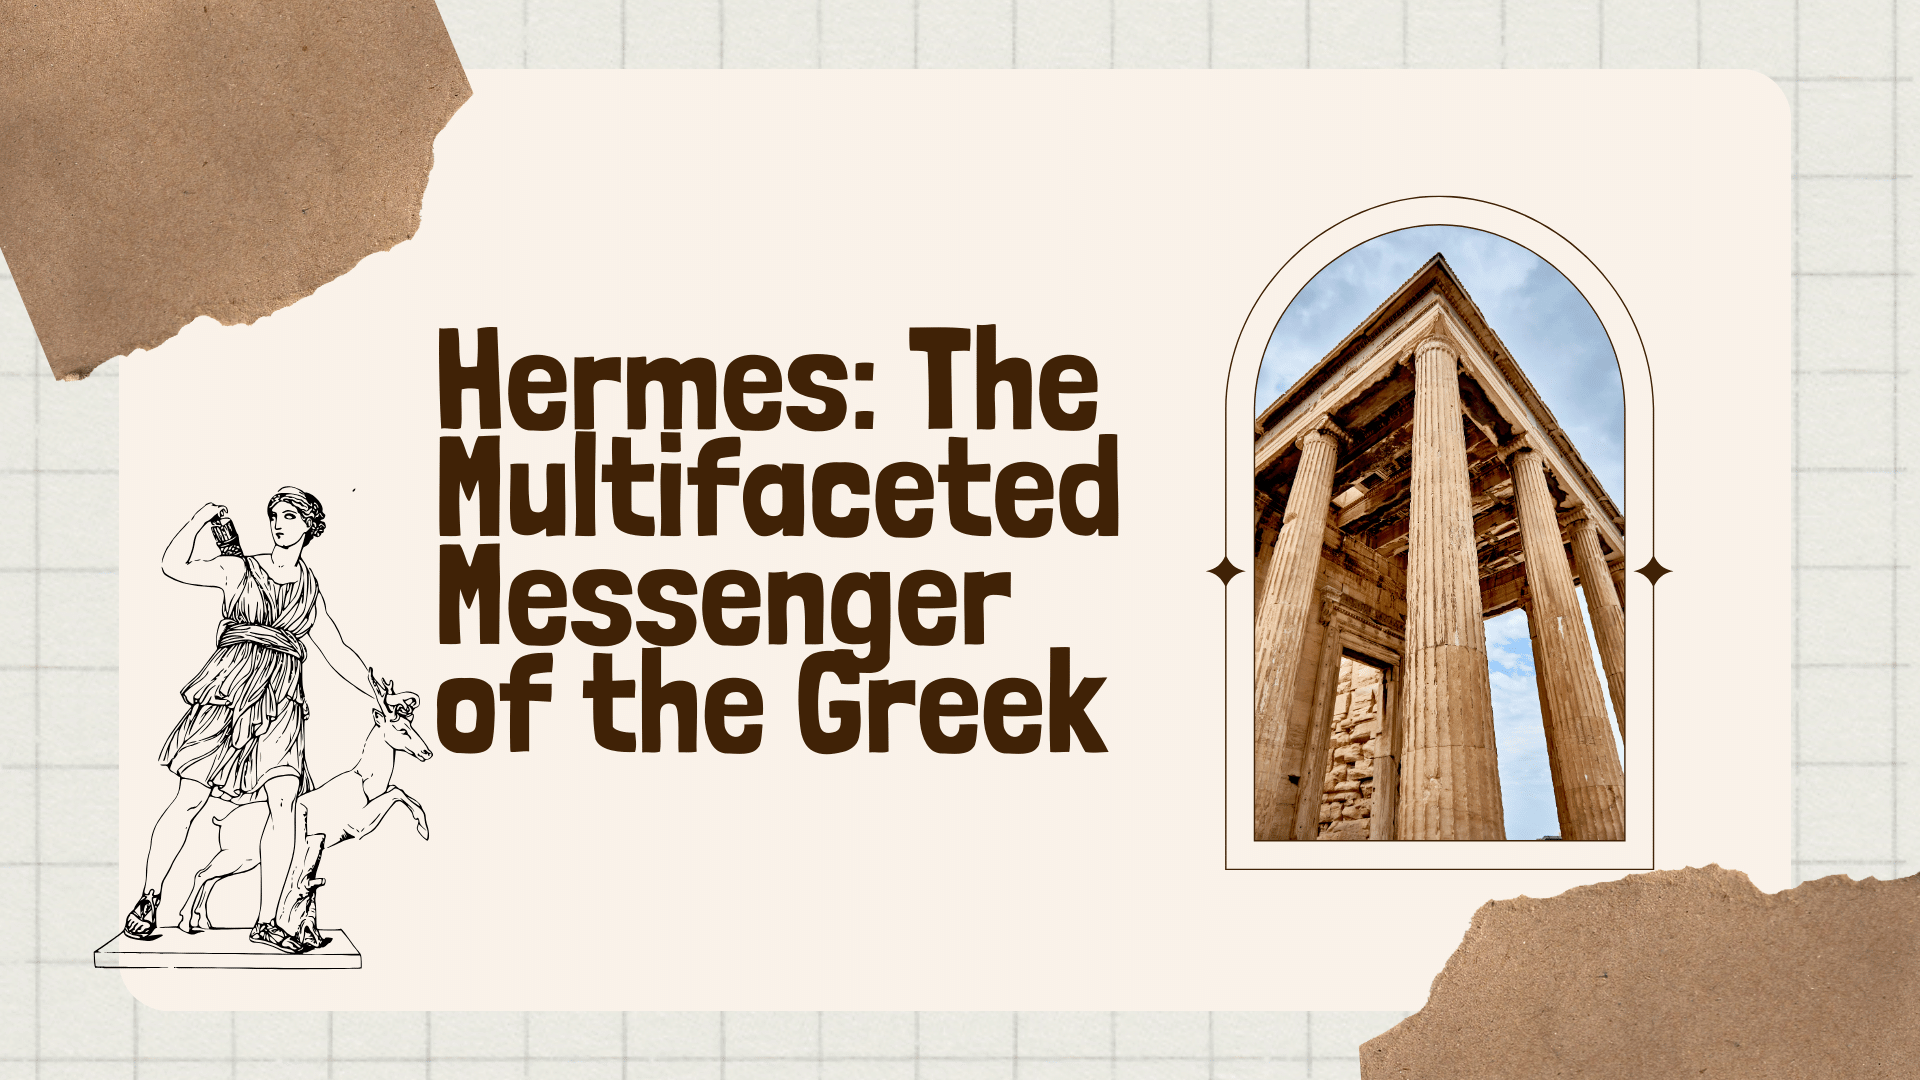 Hermes: The Multifaceted Messenger of the Greek